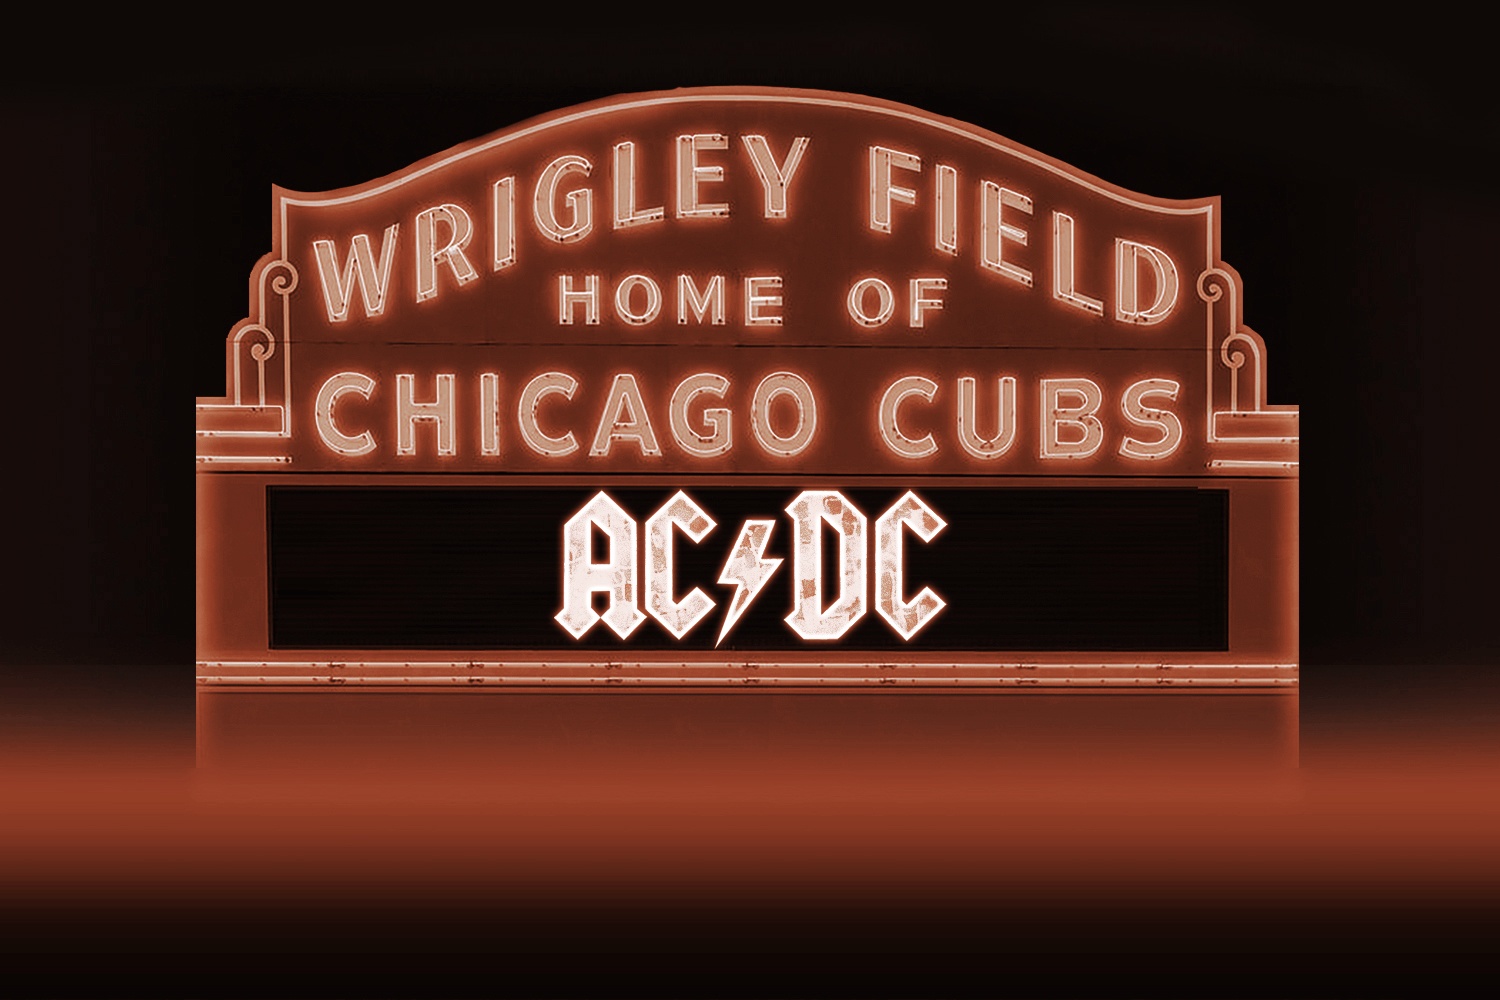 AC/DC at Wrigley Field in Chicago